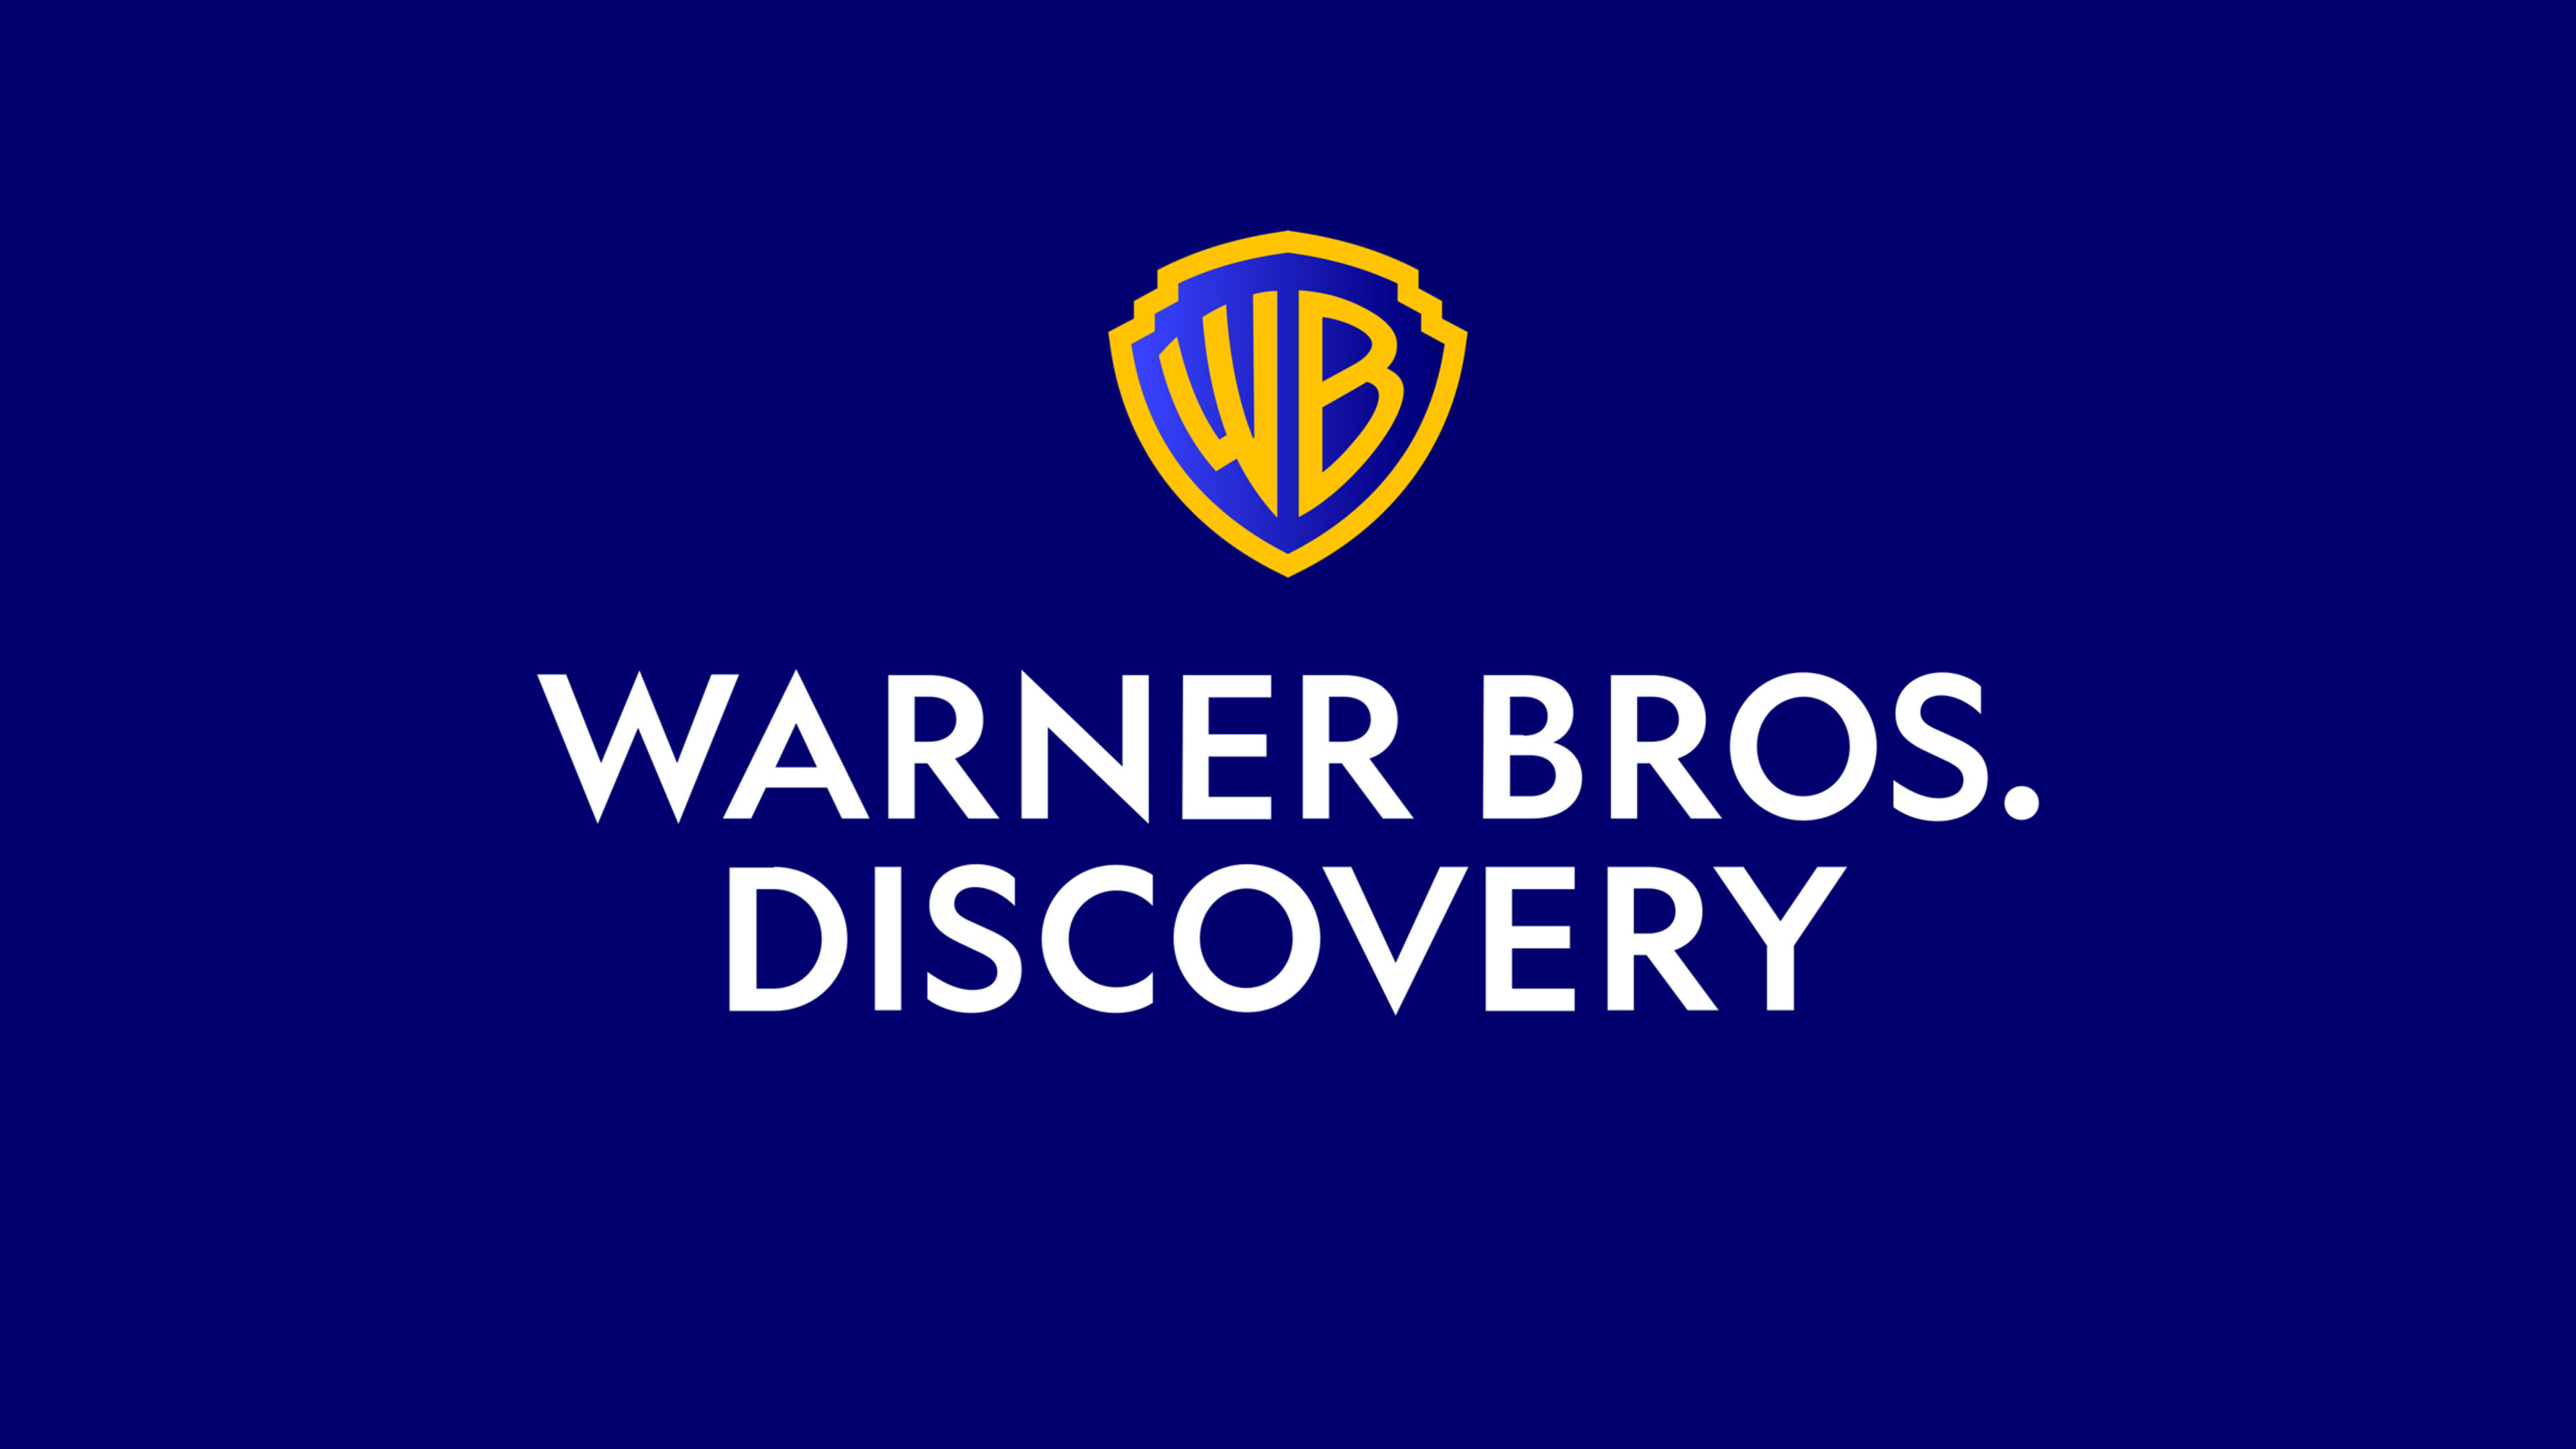 After embarrassing leak, Warner Bros. Discovery gets a modern new logo